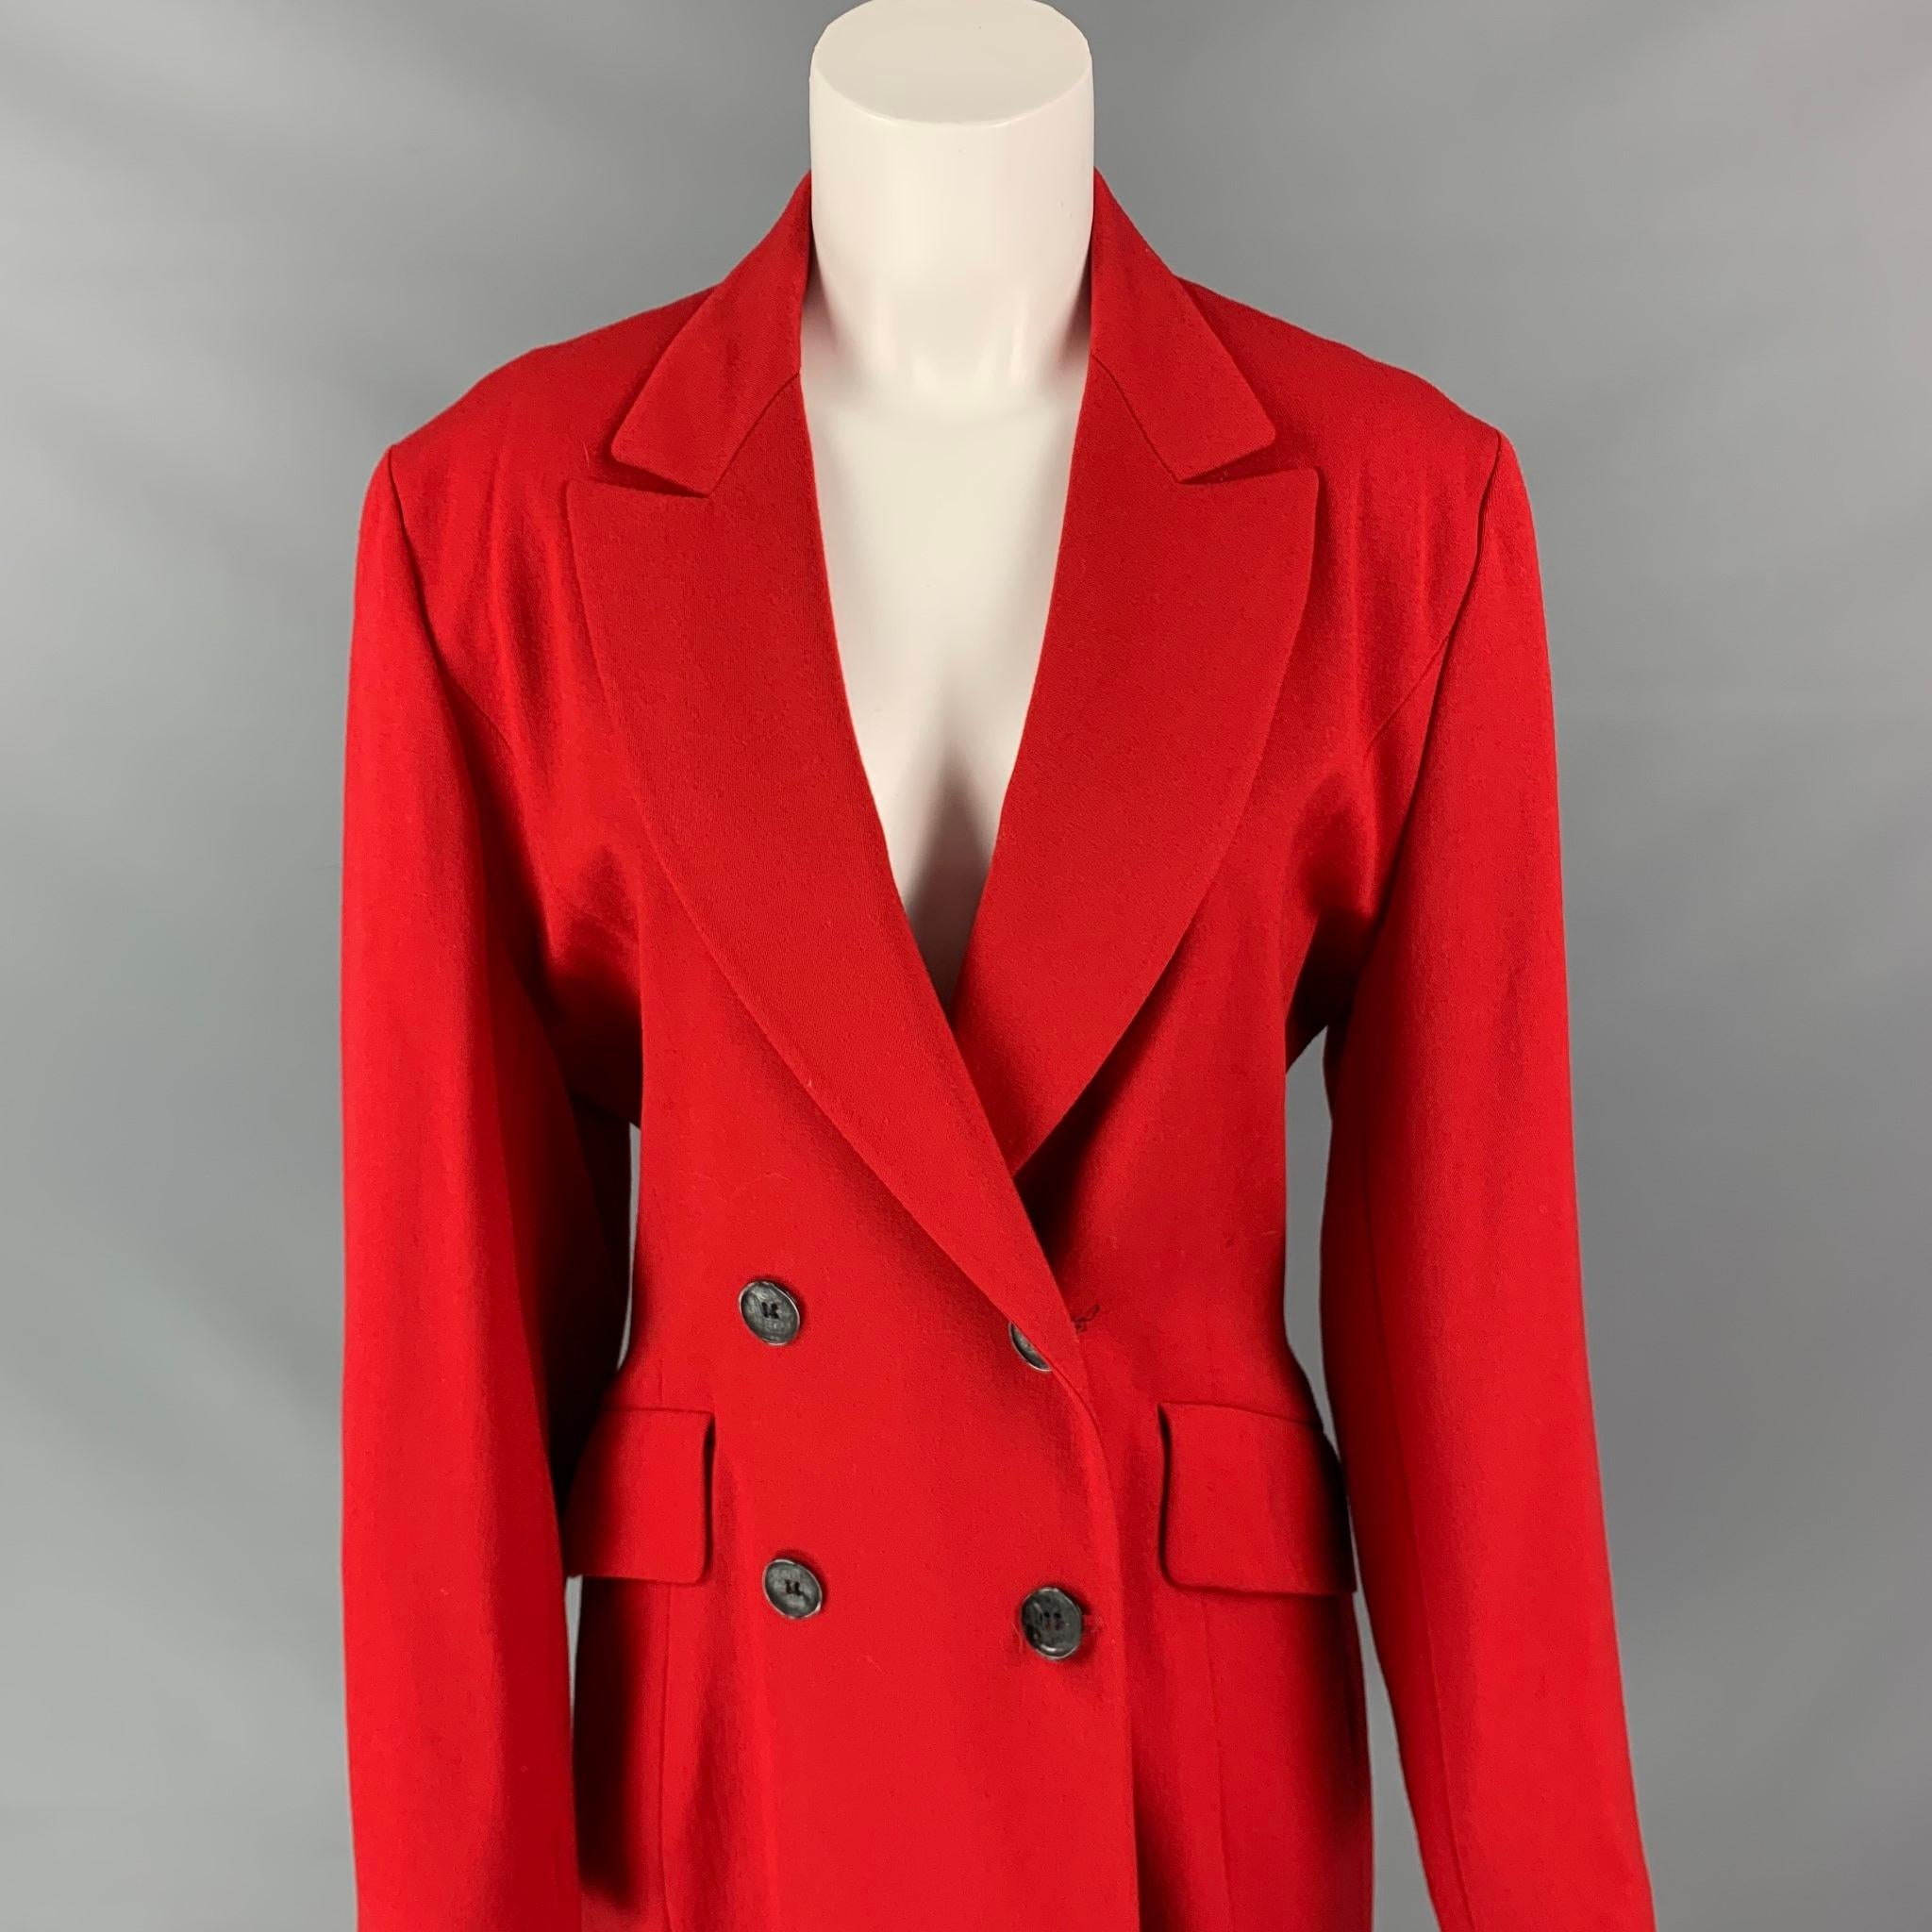 JOSEPH coat comes in a red wool with a full liner featuring a peak lapel, flap pockets, and a double breasted closure. Made in France. 

Very Good Pre-Owned Condition.
Marked: 2

Measurements:

Shoulder: 16.5 in.
Bust: 38 in.
Sleeve: 25 in.
Length: